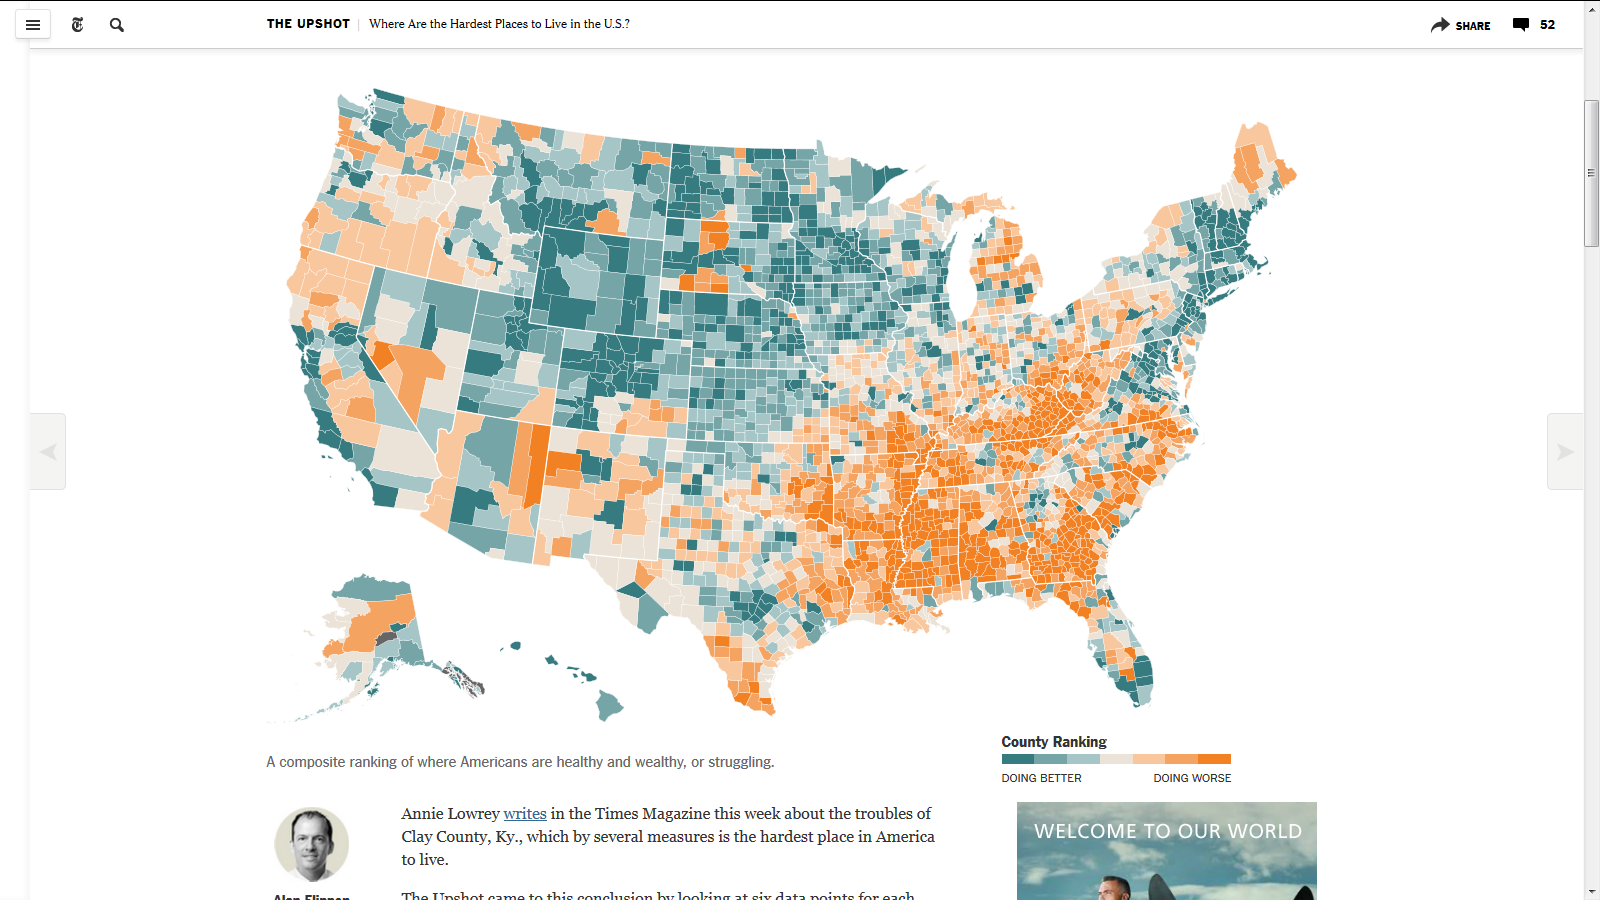 http://www.nytimes.com/2014/06/26/upshot/where-are-the-hardest-places-to-live-in-the-us.html?smid=fb-nytimes&WT.z_sma=UP_WAT_20140627&bicmp=AD&bicmlukp=WT.mc_id&bicmst=1388552400000&bicmet=1420088400000&_r=3#